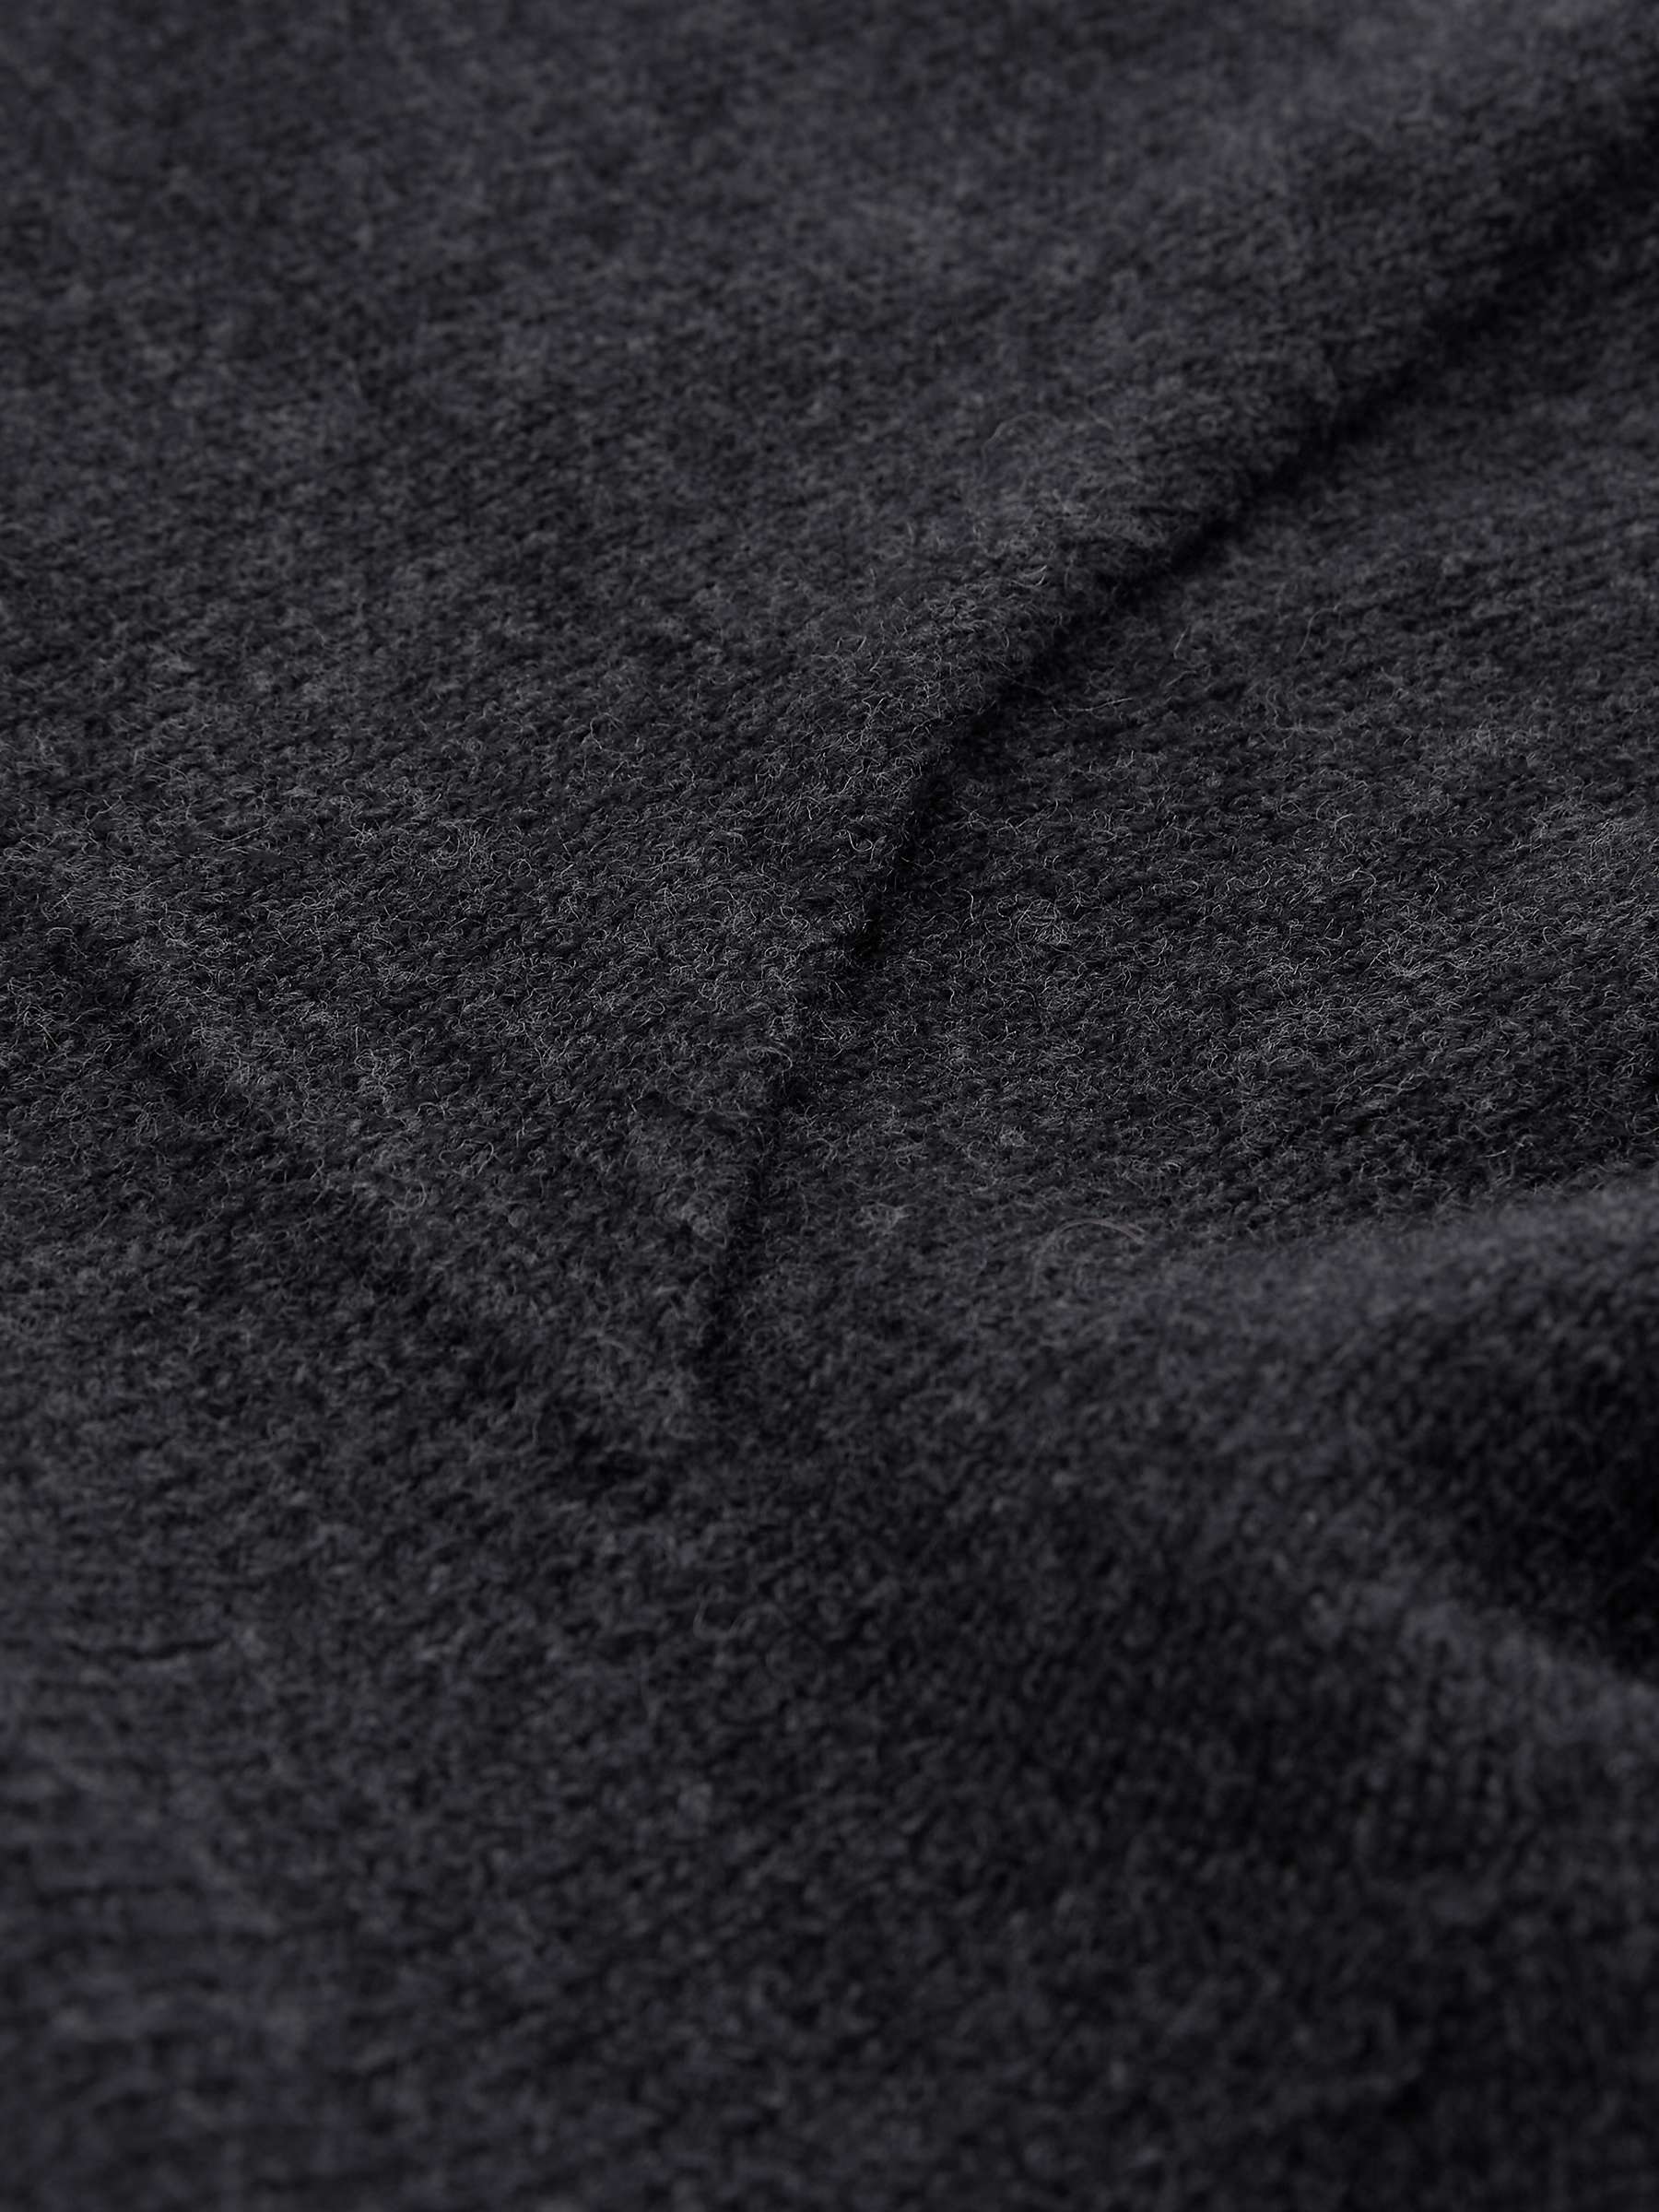 Celtic & Co. Collared Slouch Wool Jumper, Charcoal at John Lewis & Partners